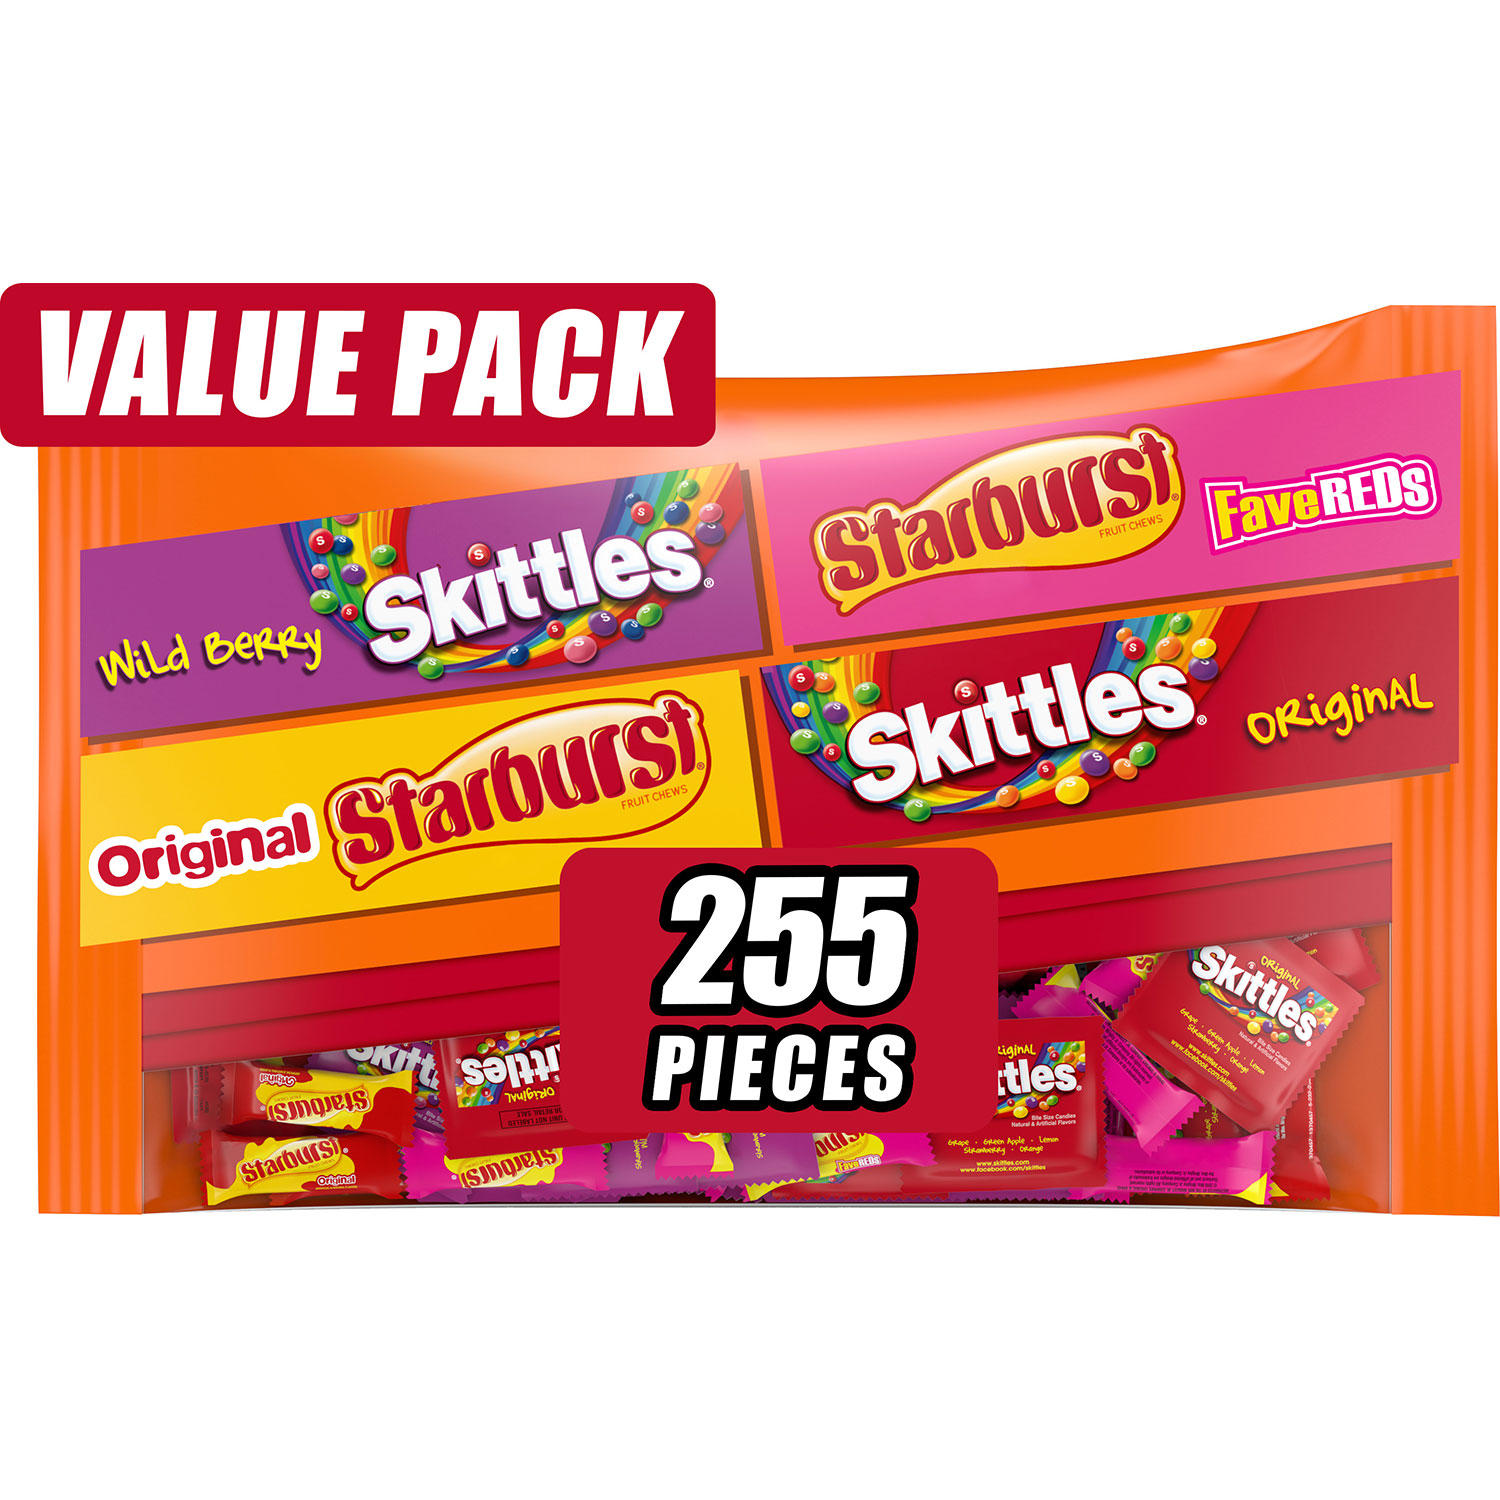 Skittles and Starburst Fun Size Variety Pack, 6 lb 8.4 oz Bag, Delivered in 1-4 Business Days